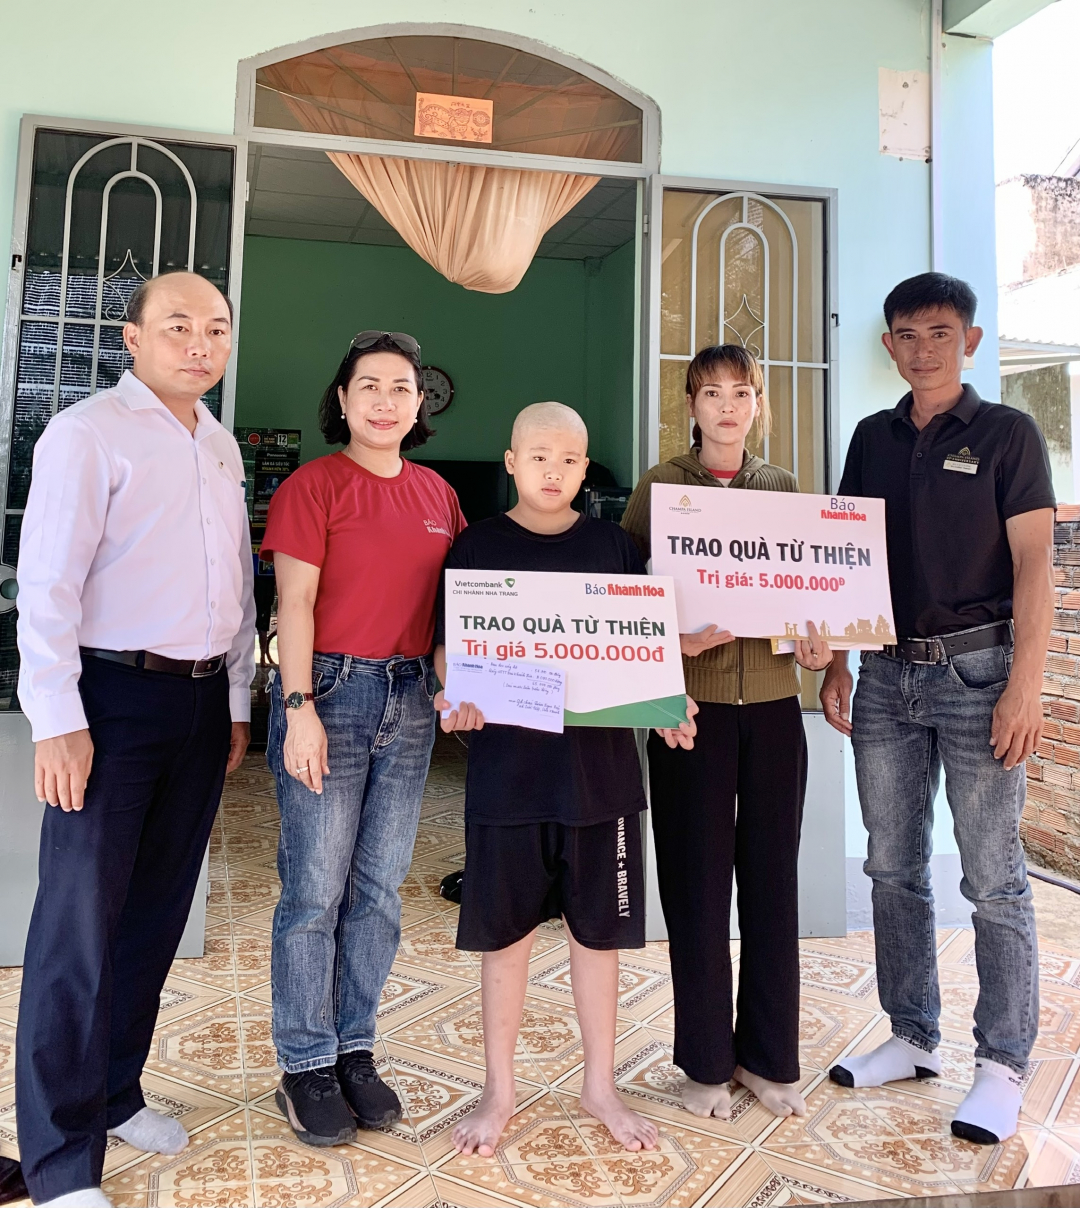 Over VND88 donated to 10-year-old child with blood cancer